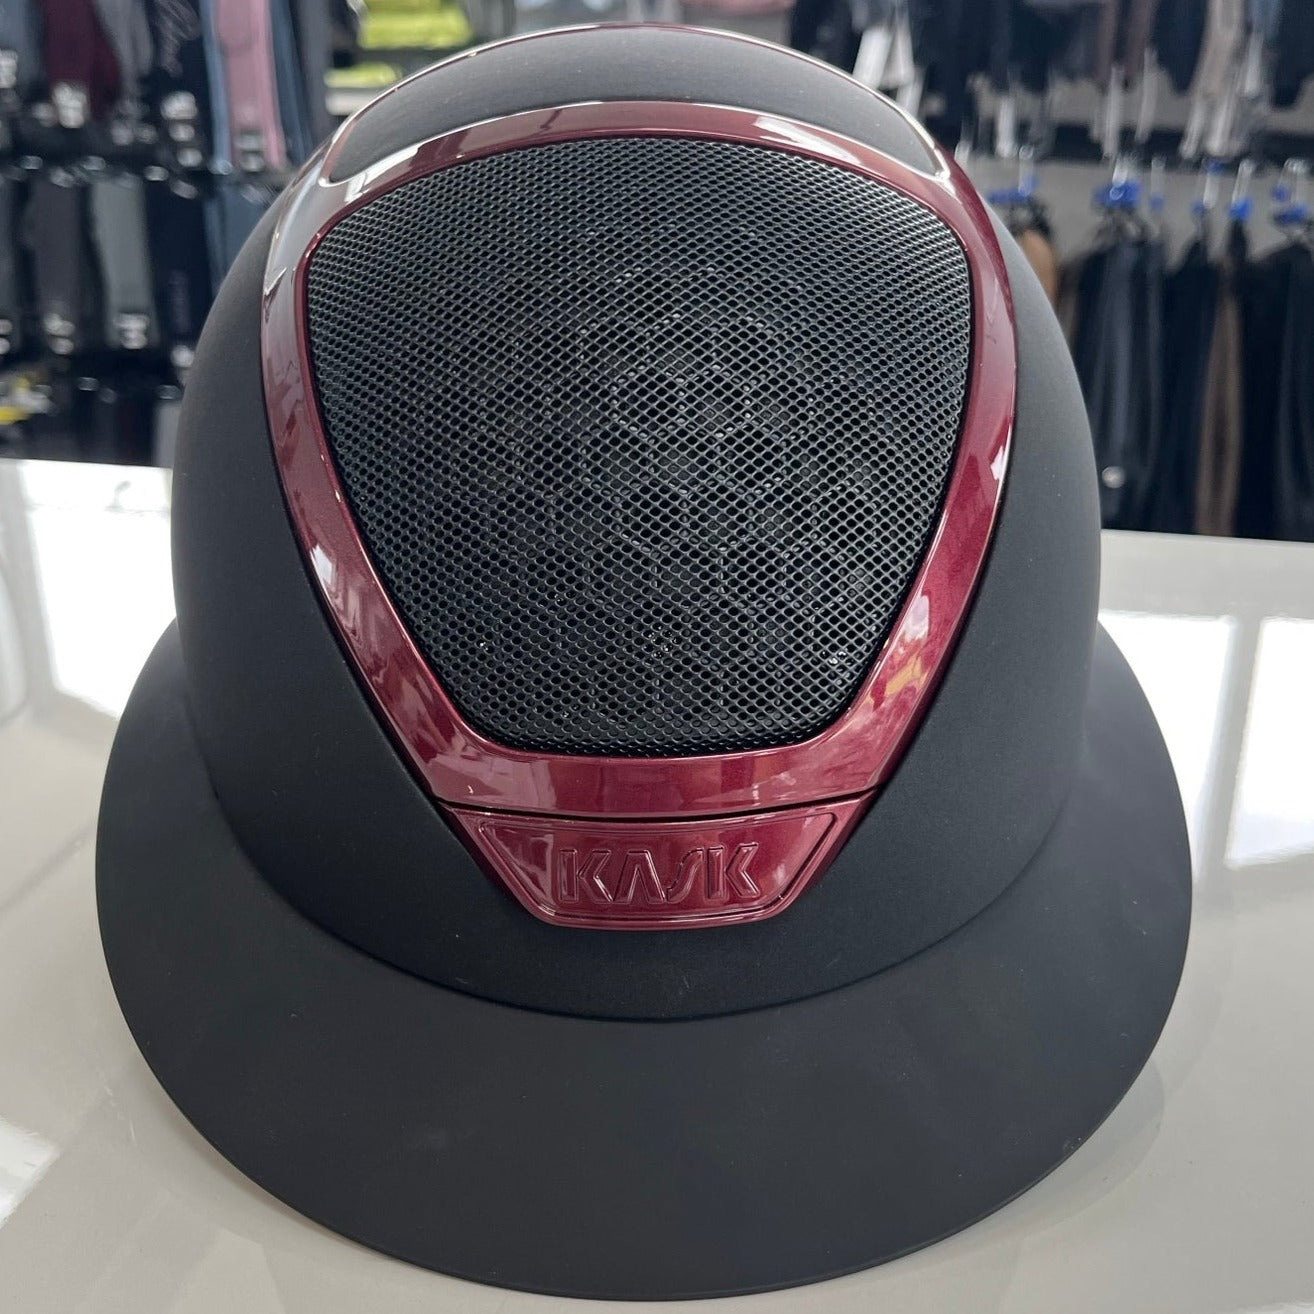 Kask Star Lady Black with burgundy trim M- in stock and ready to ship!